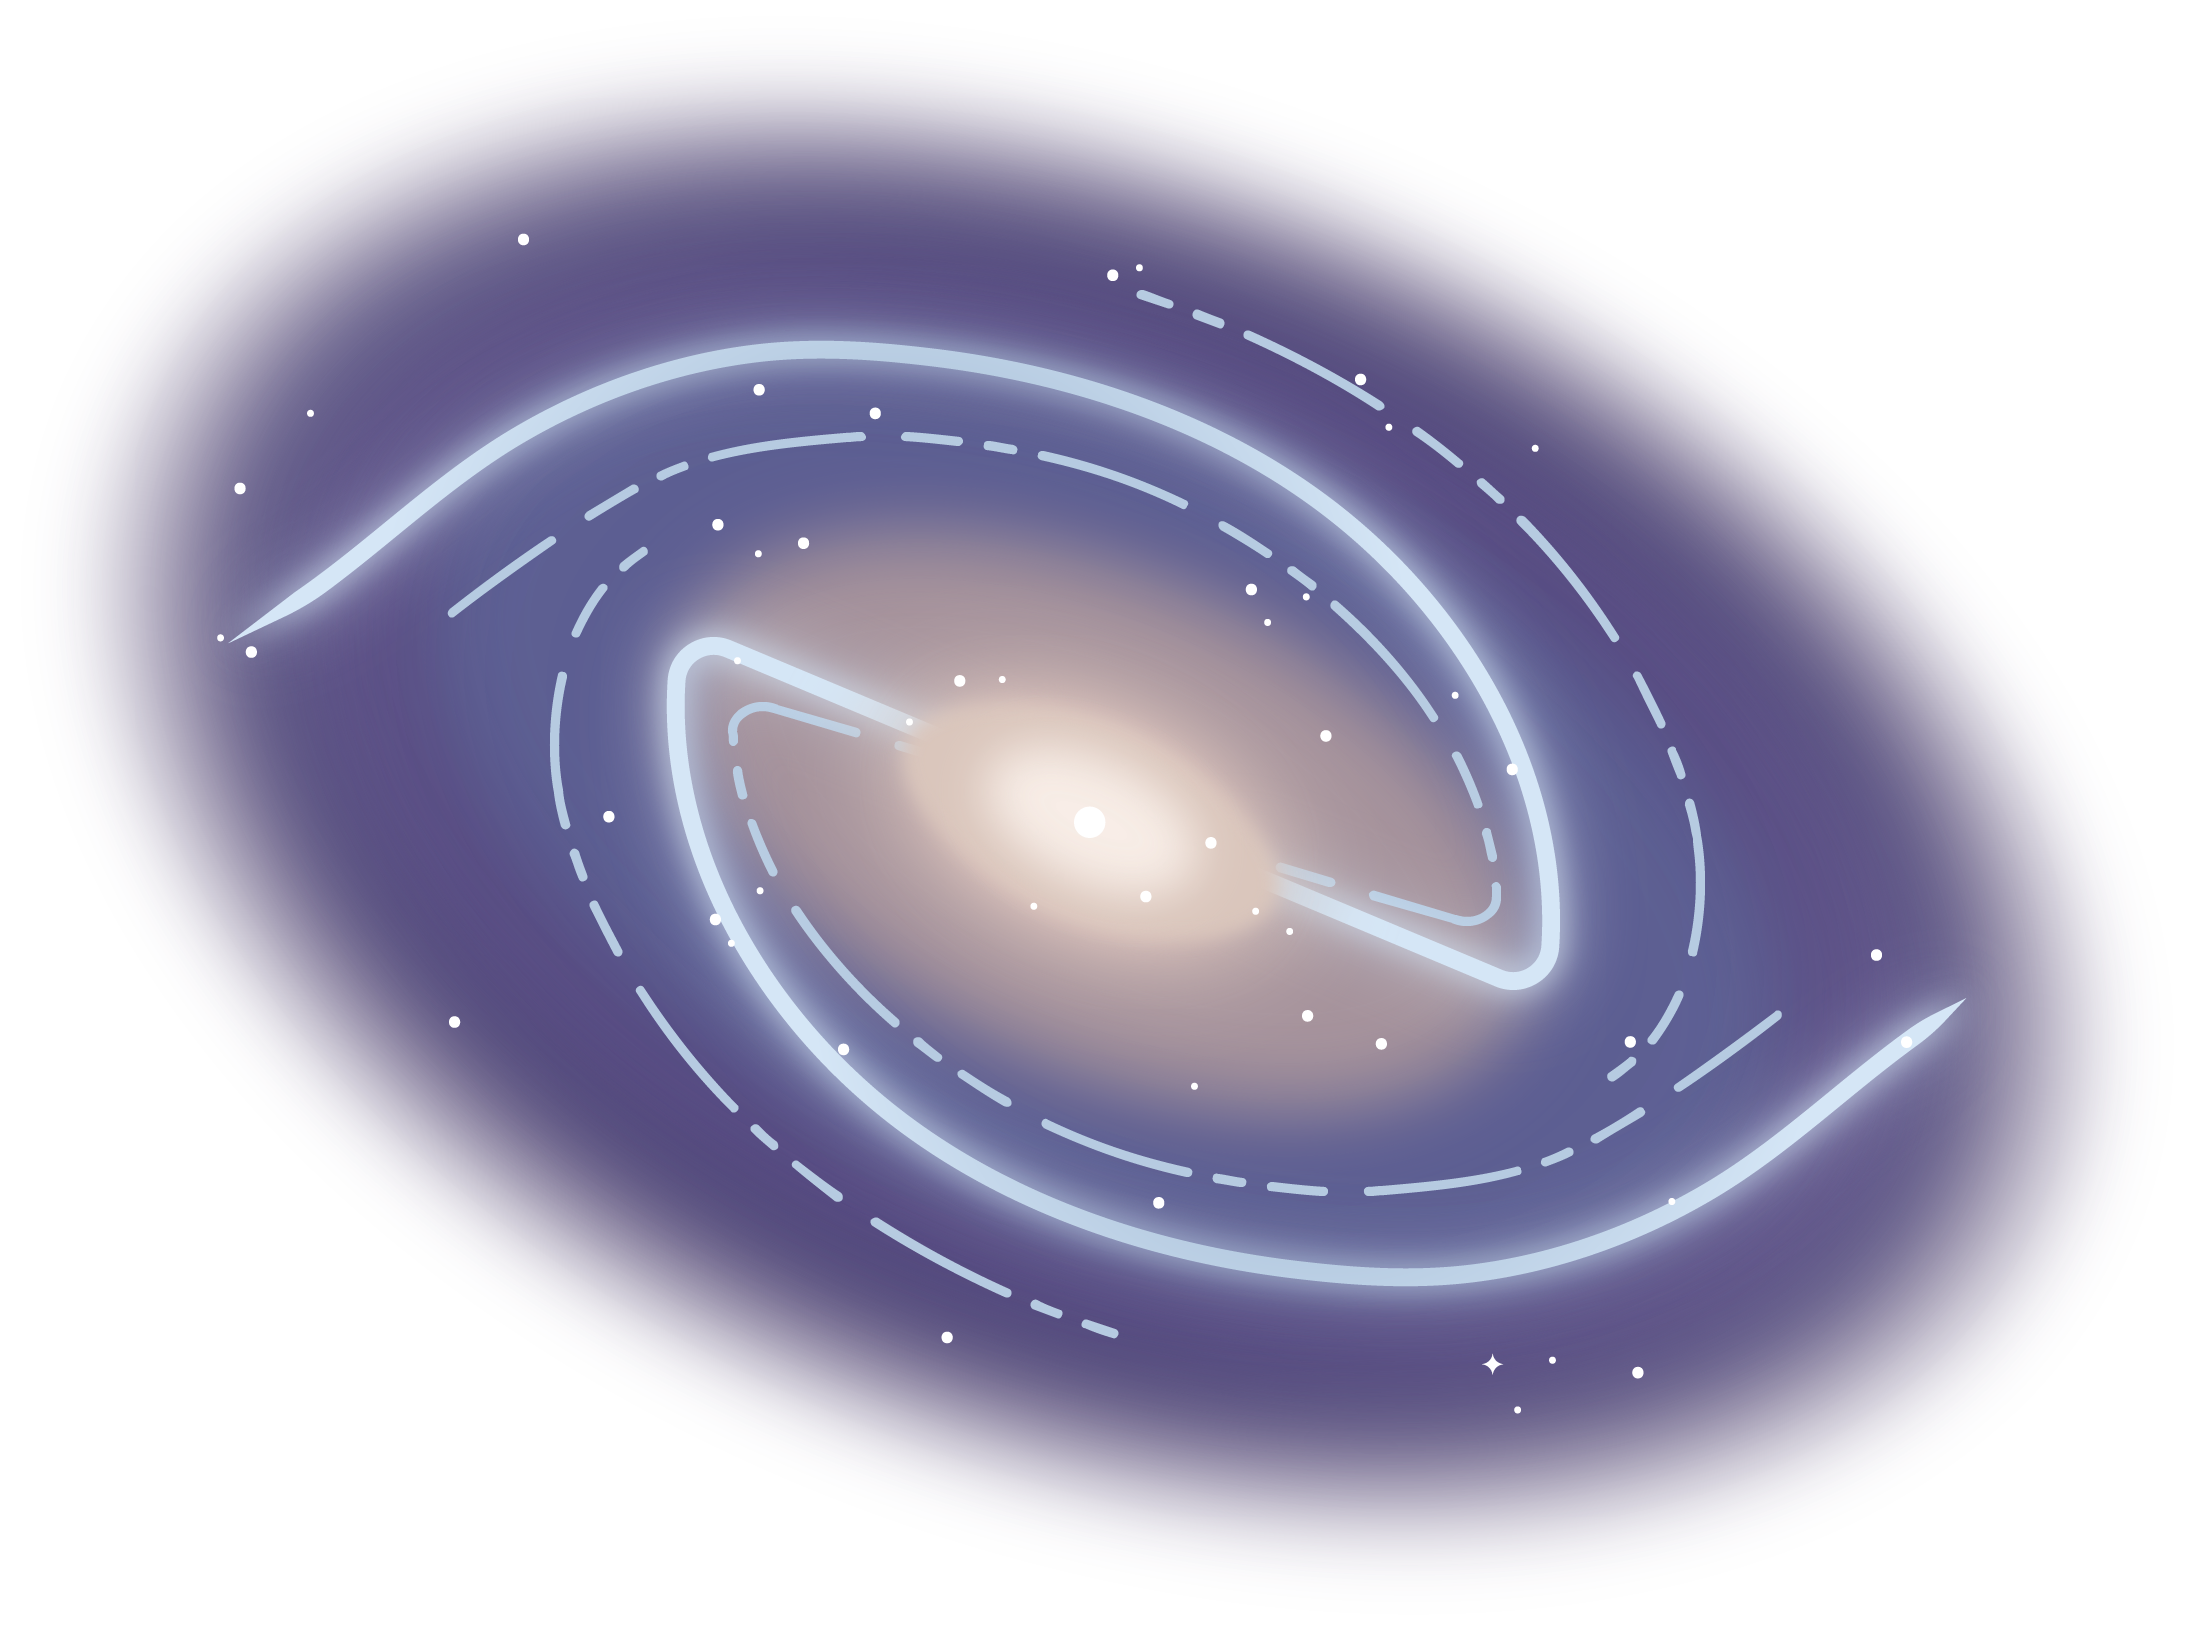 A background of medium, bright purple shows a bright, white, thin line that creates an oblong, elongated swirl that connects in the middle with a yellowish, diffuse cloud. White dots representing stars speckle the image.